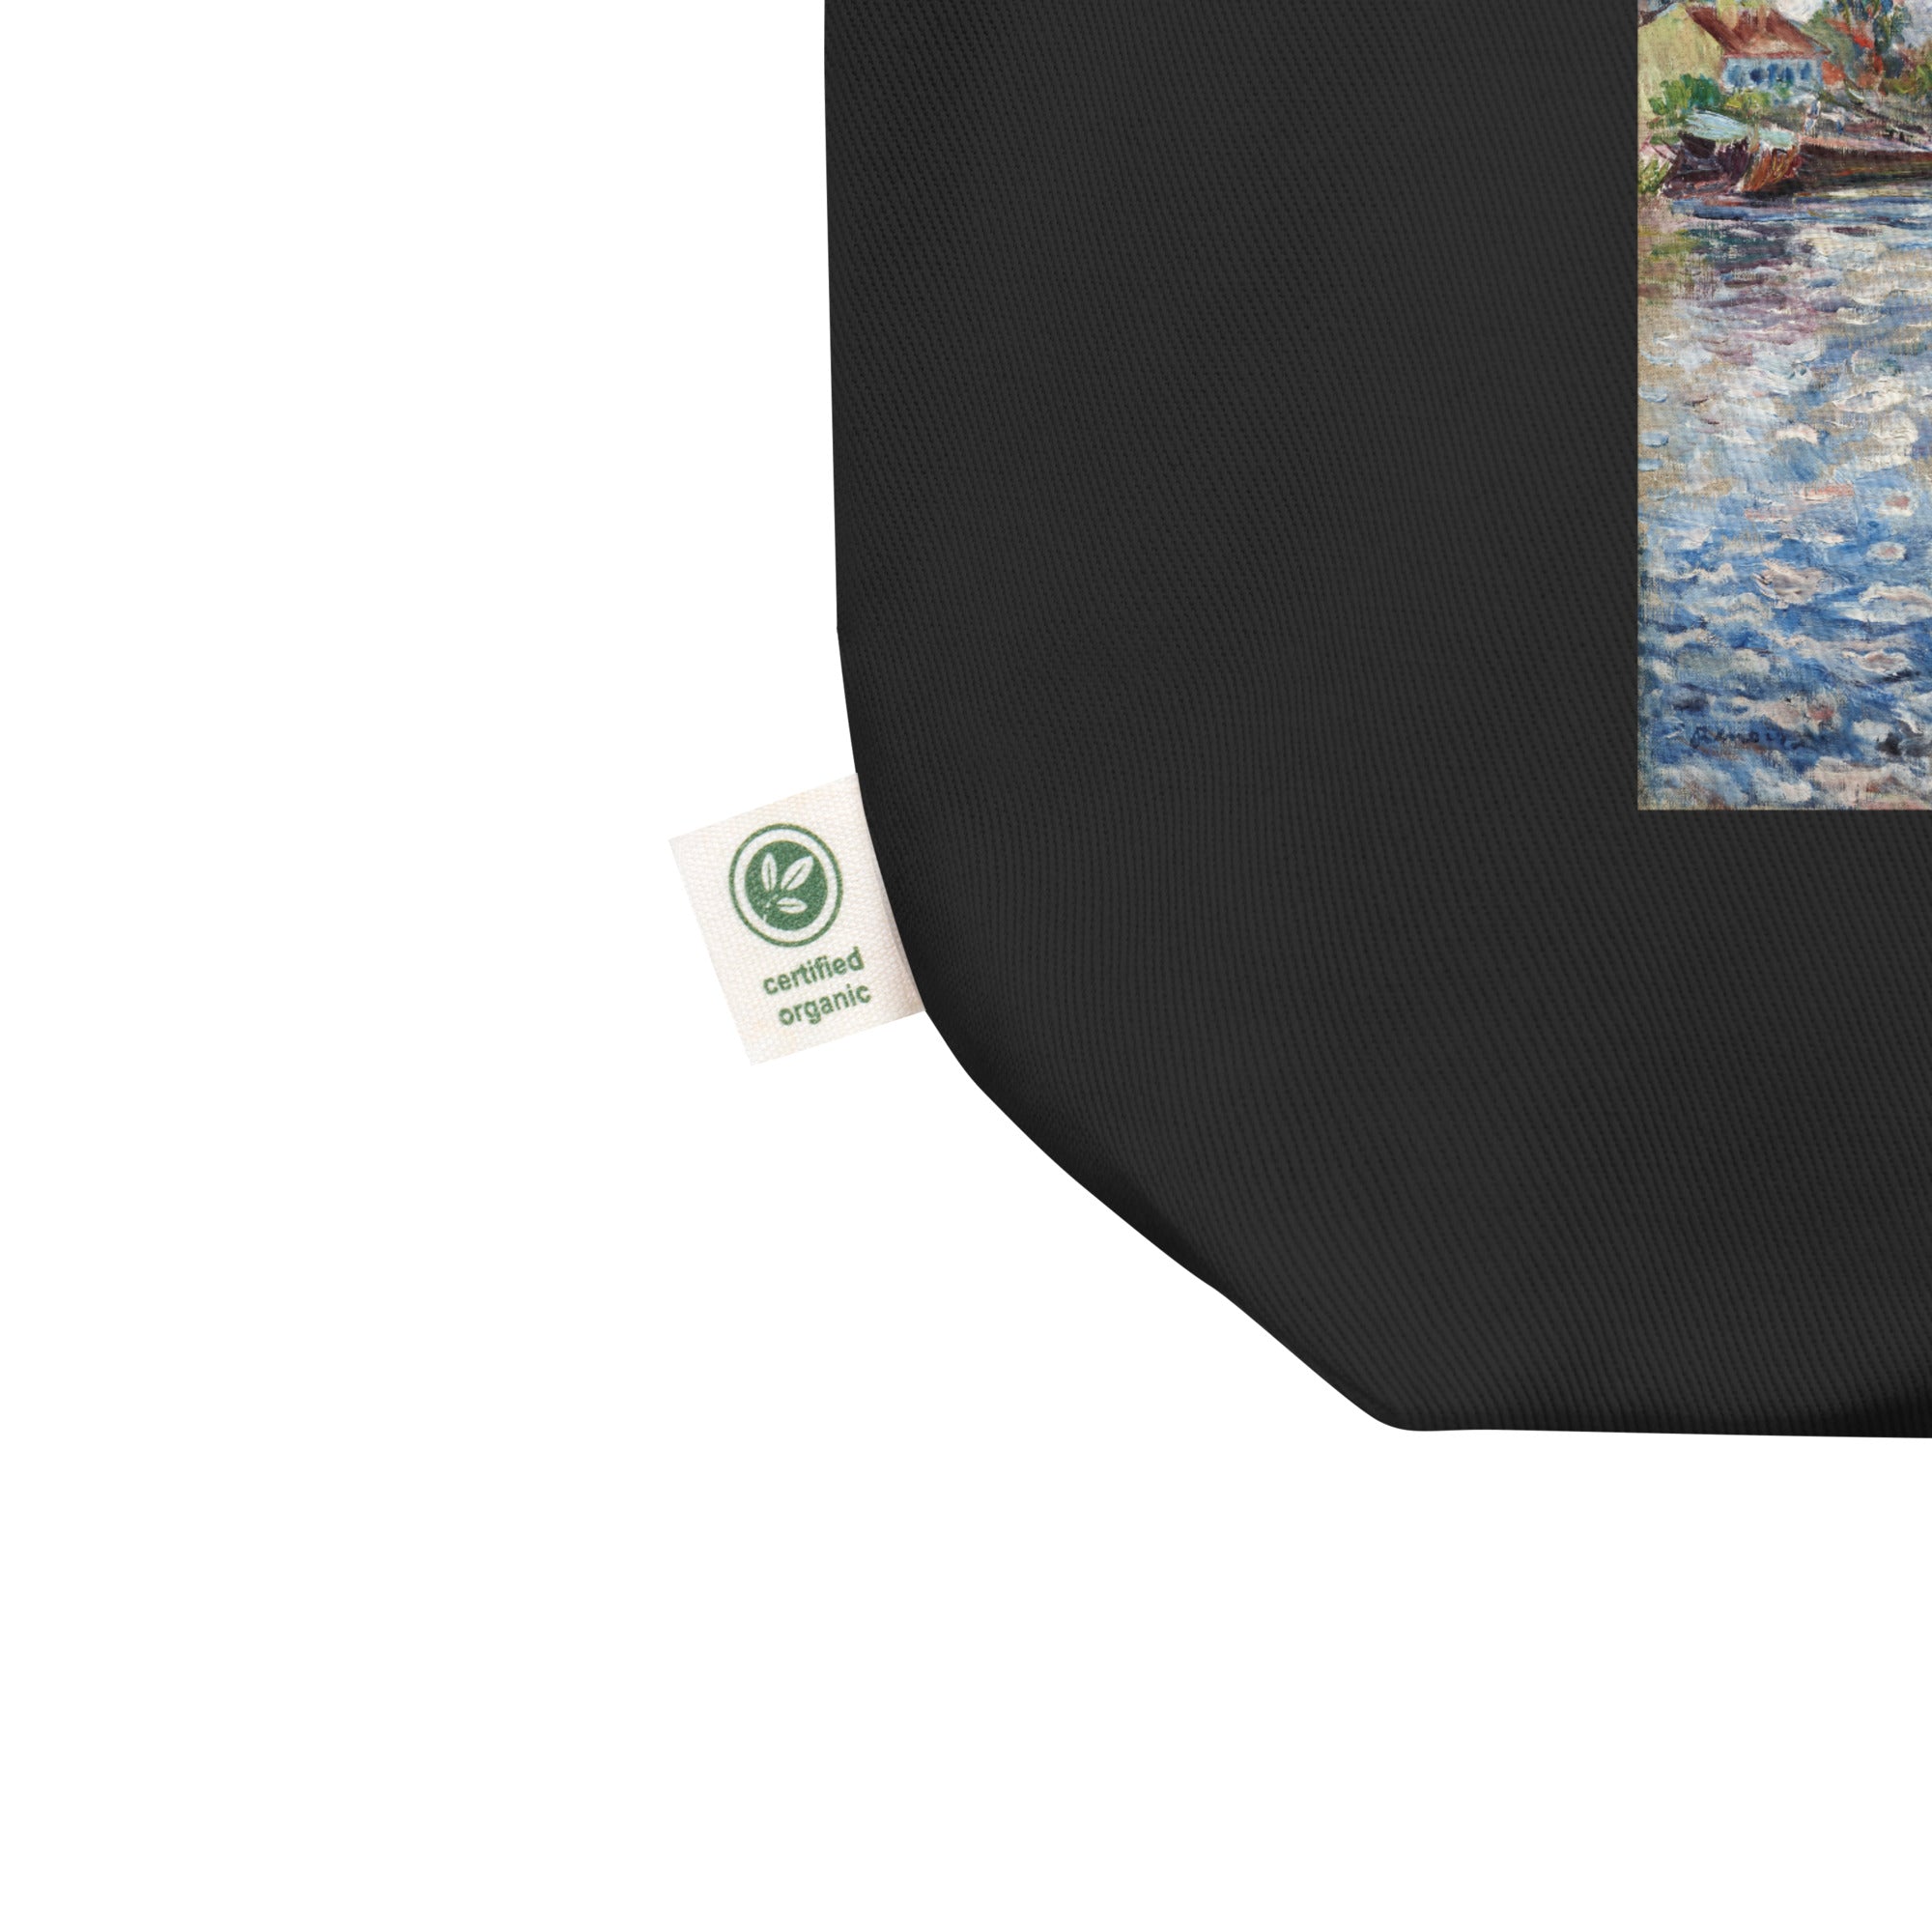 Pierre-Auguste Renoir 'The Seine at Chatou' Famous Painting Totebag | Eco Friendly Art Tote Bag